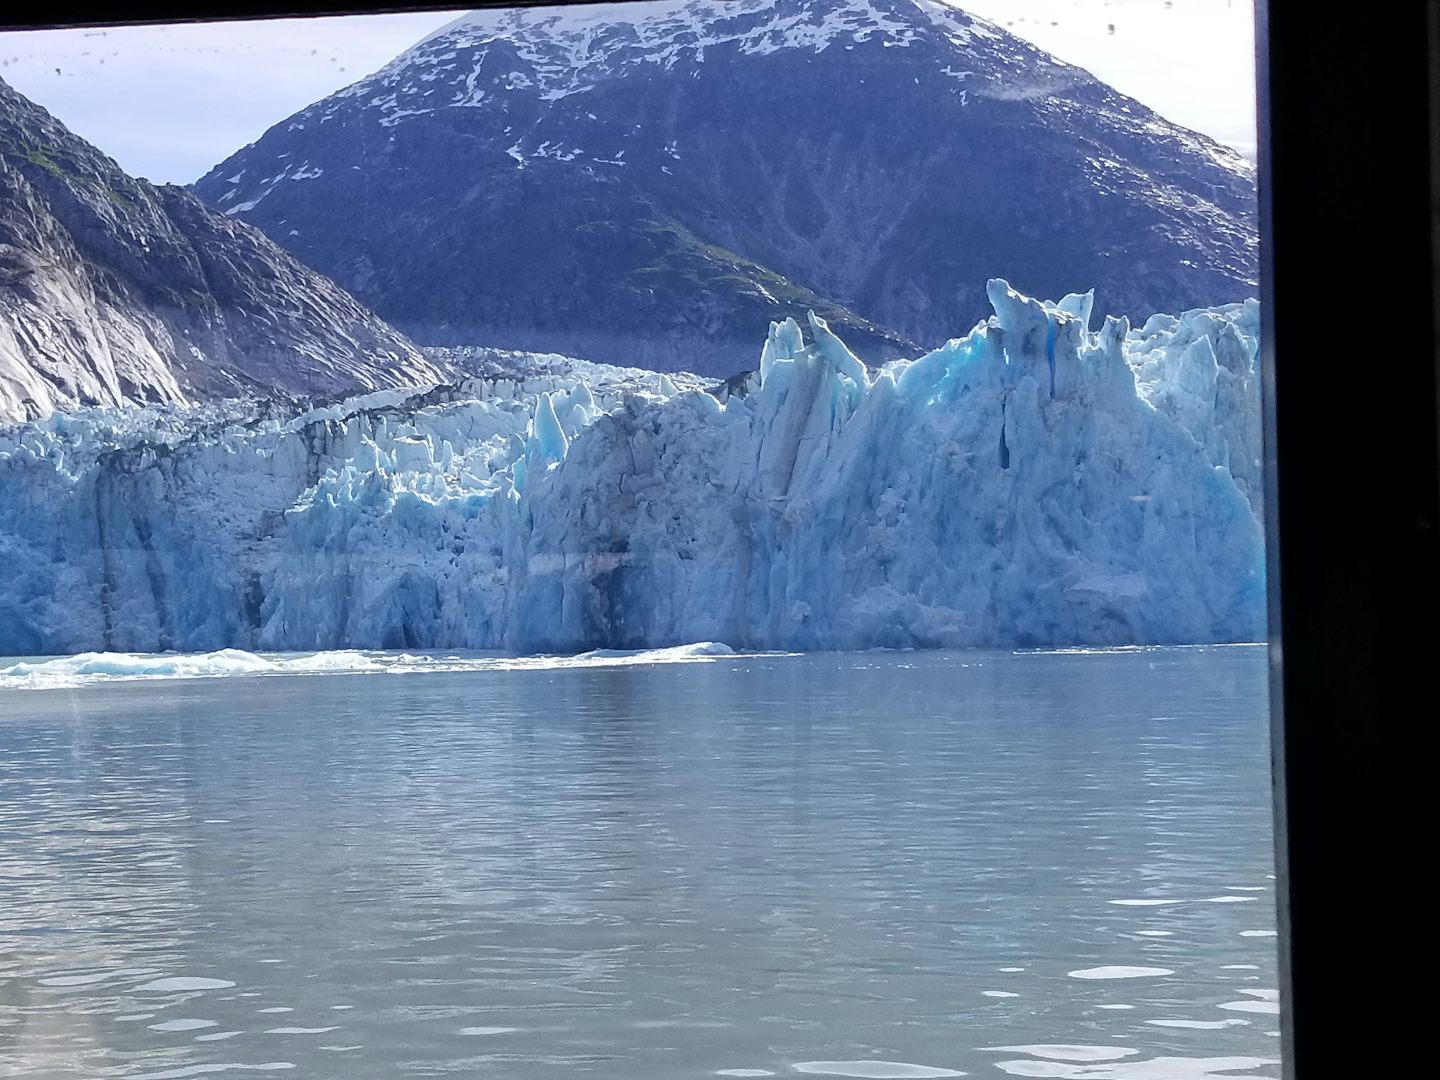 Glacier - took the catamaran tour from Tracy Arms Fjords to Juneau.  Highly